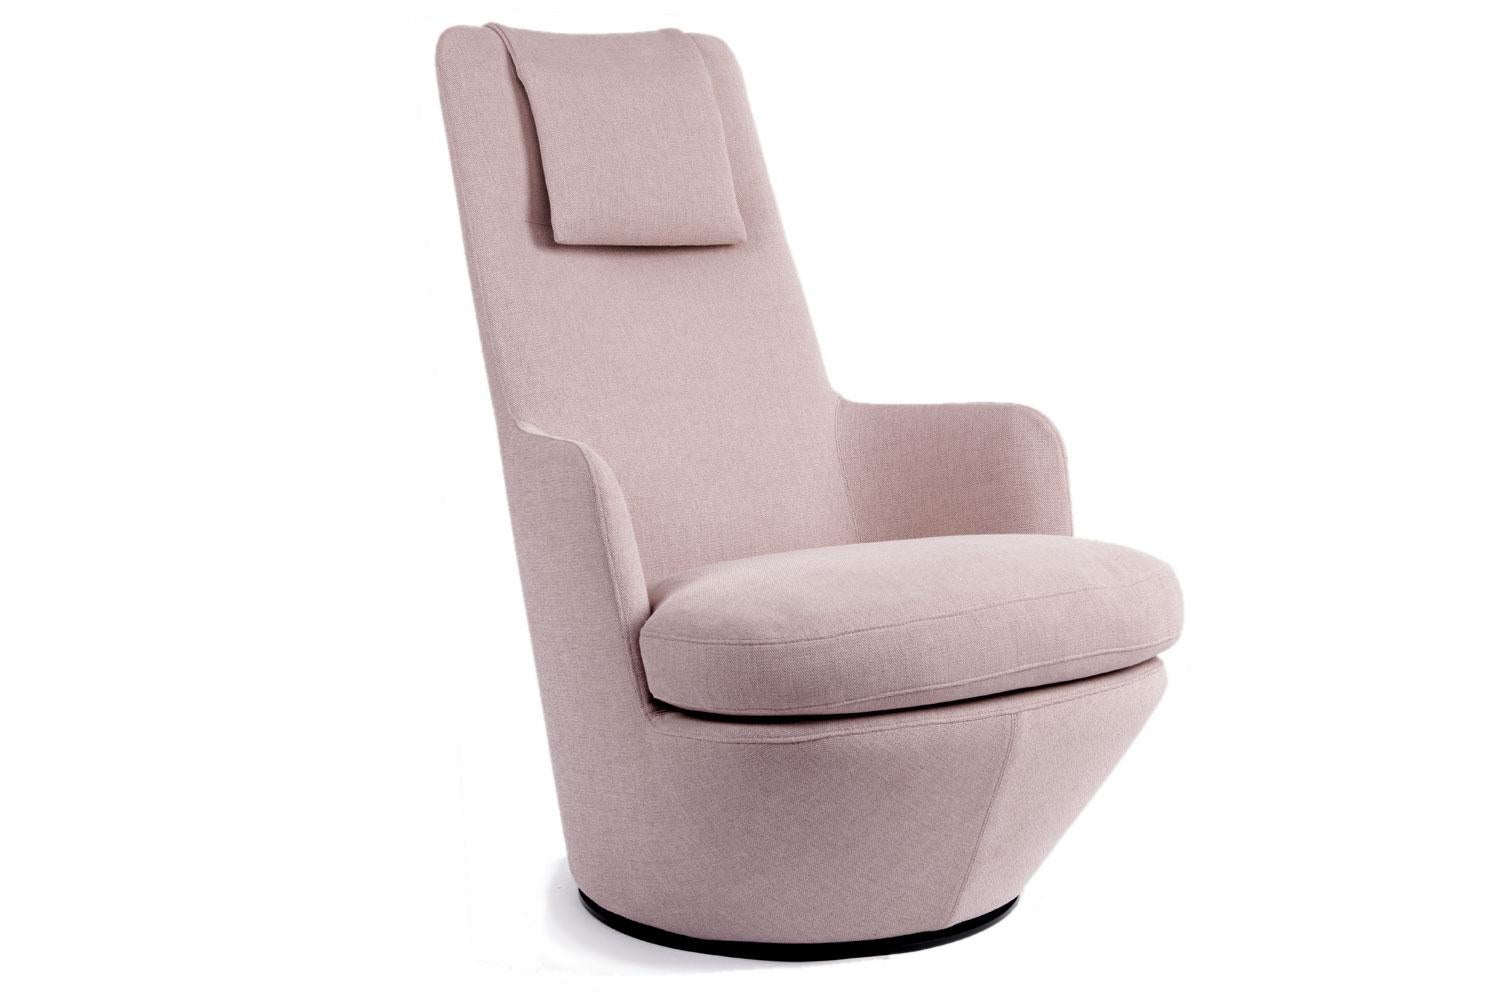 Hi Turn swivel lounge chair by Bensen

Hi Turn is a high back lounge chair that swivels on a discrete circular metal base that rotates smoothly trhough 360º. The combination of an internal steel frame, injection molded cold foam, and a soft down